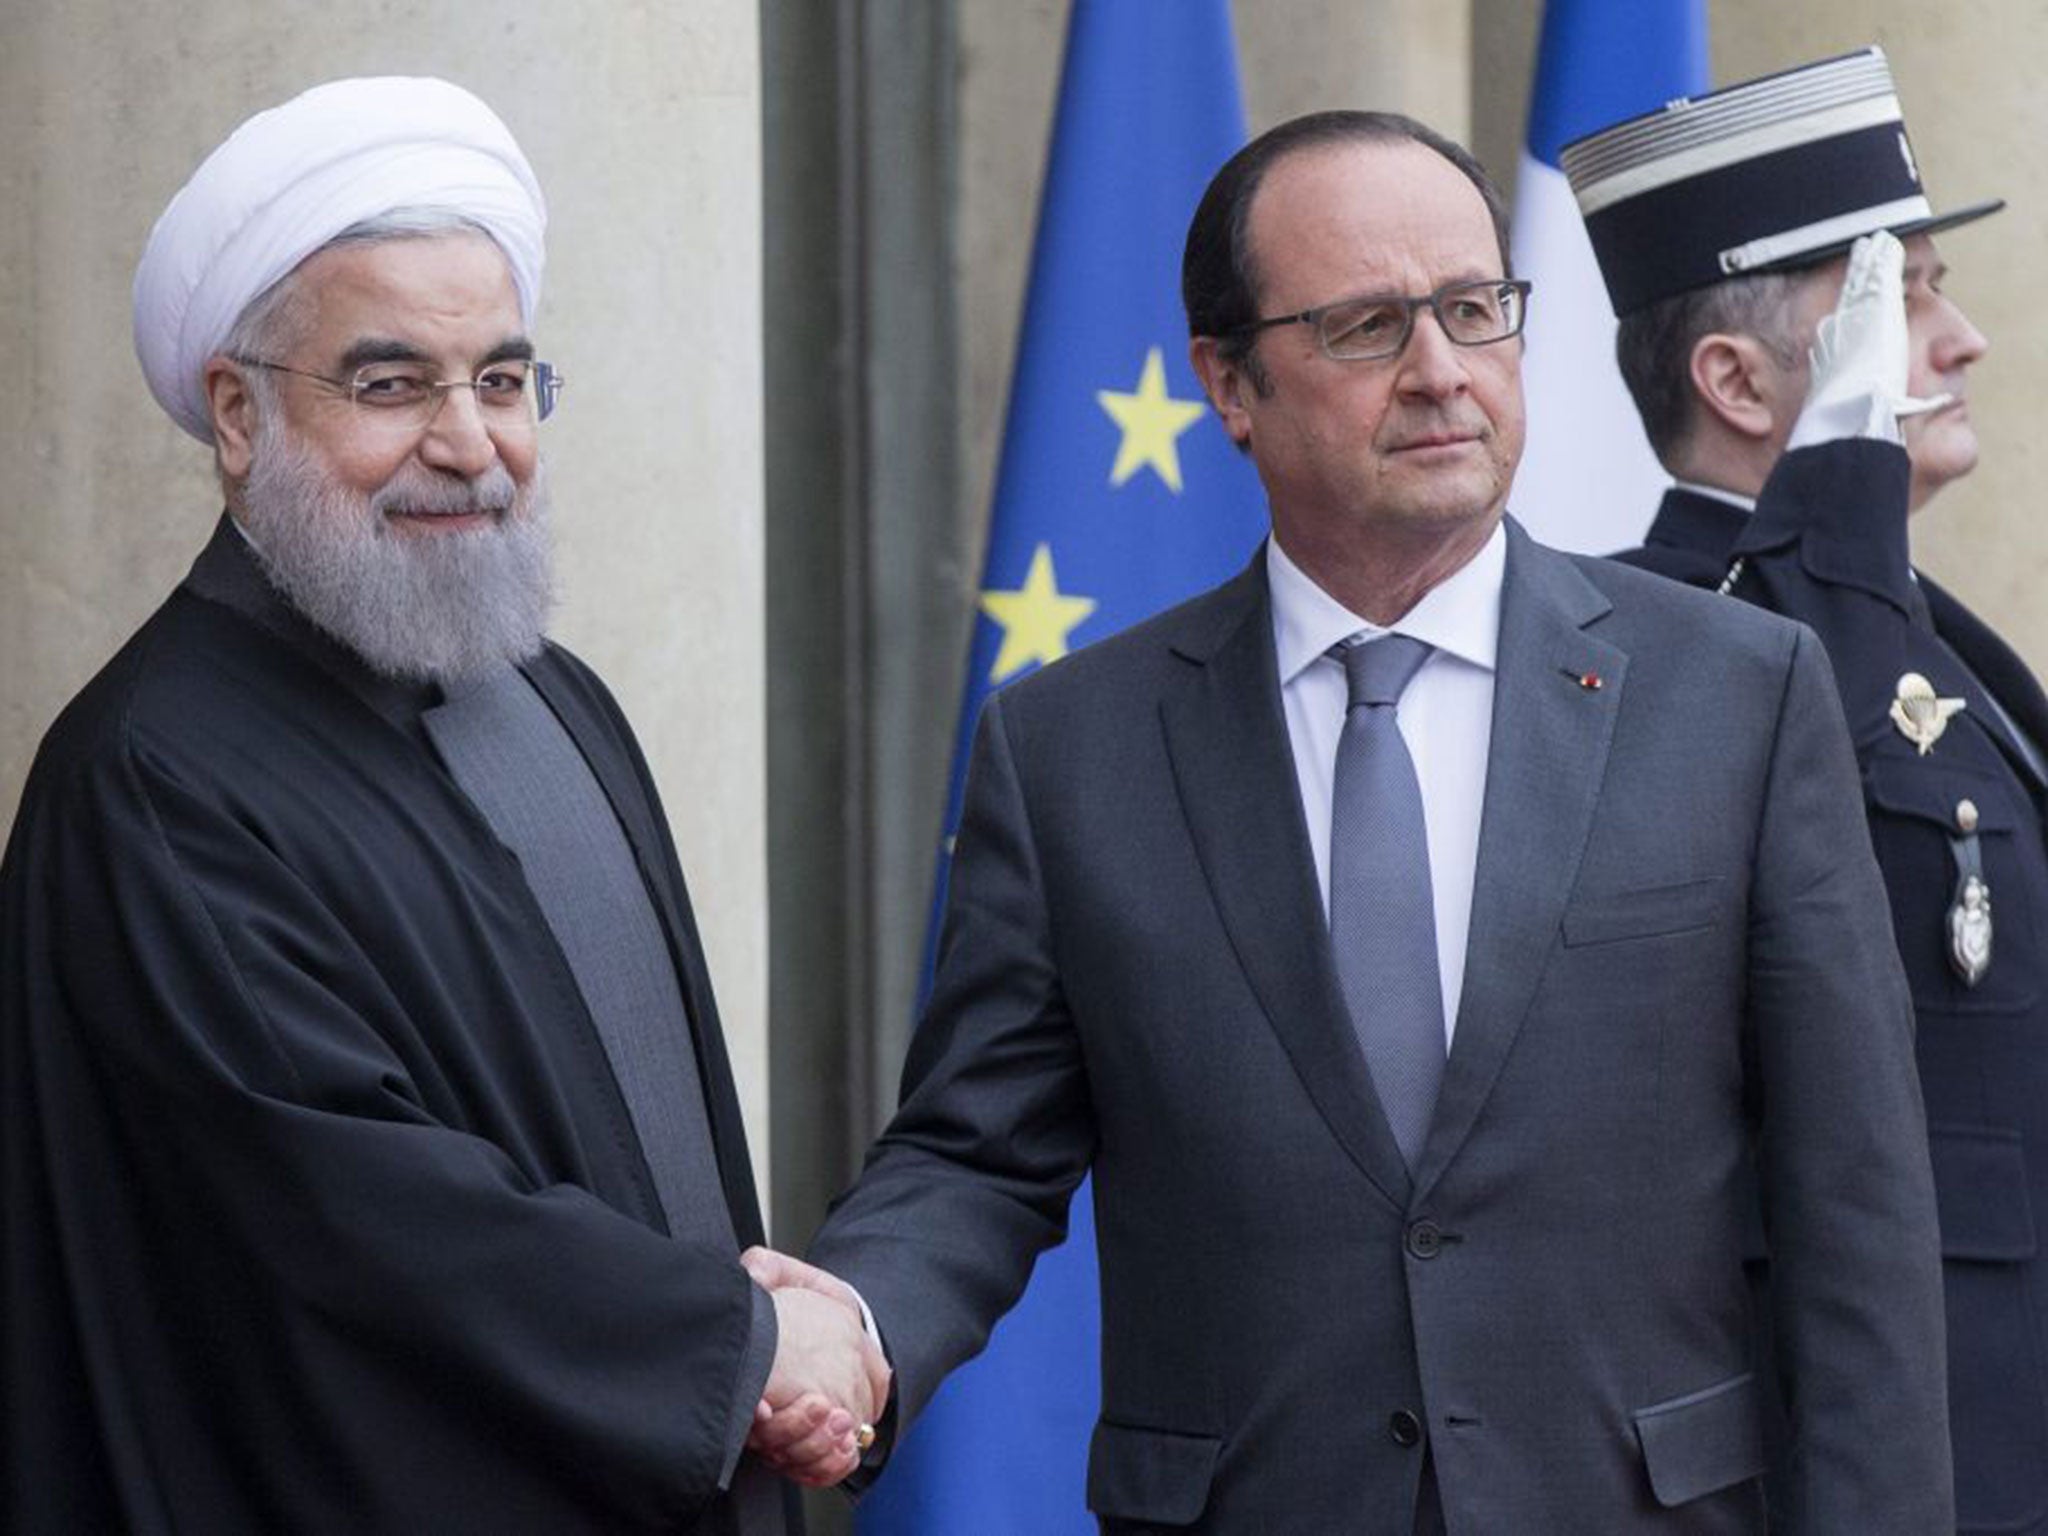 Iranian President Hassan Rouhani, left, is welcomed by French President Francois Hollande upon his arrival at the Elysee Palace on Monday